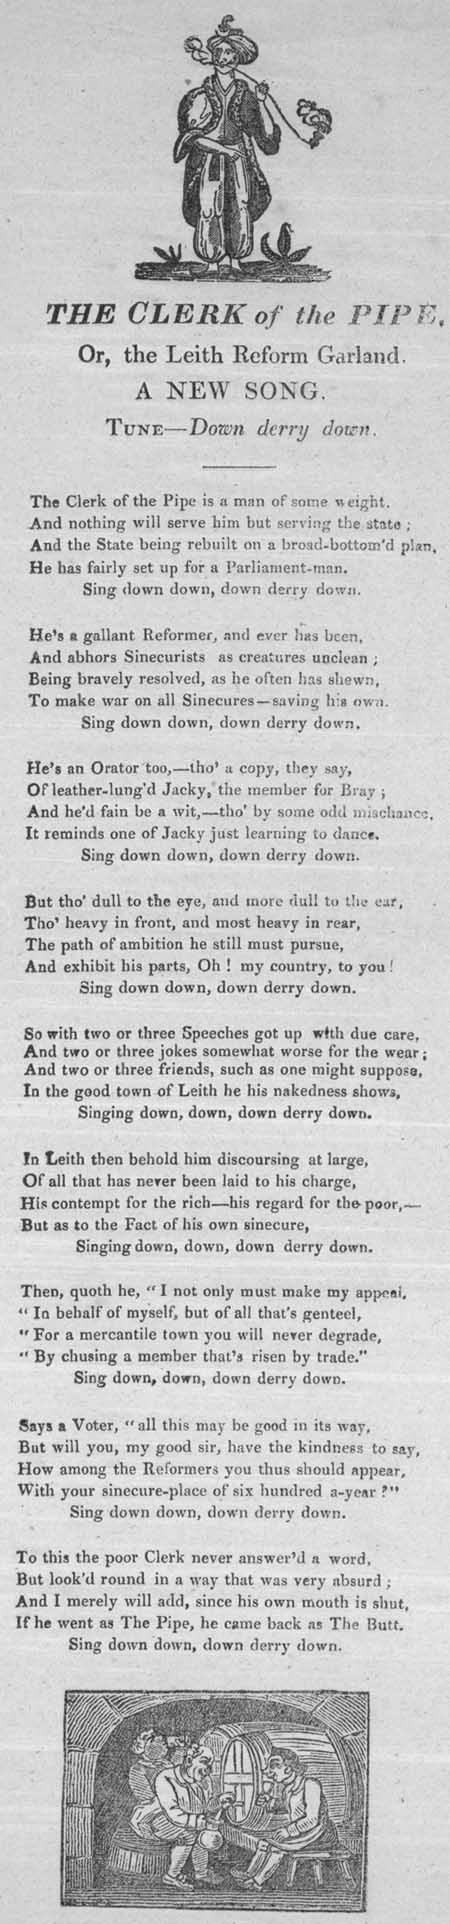 Broadside ballad entitled 'The Clerk of the Pipe, Or, The Leith Reform Garland'